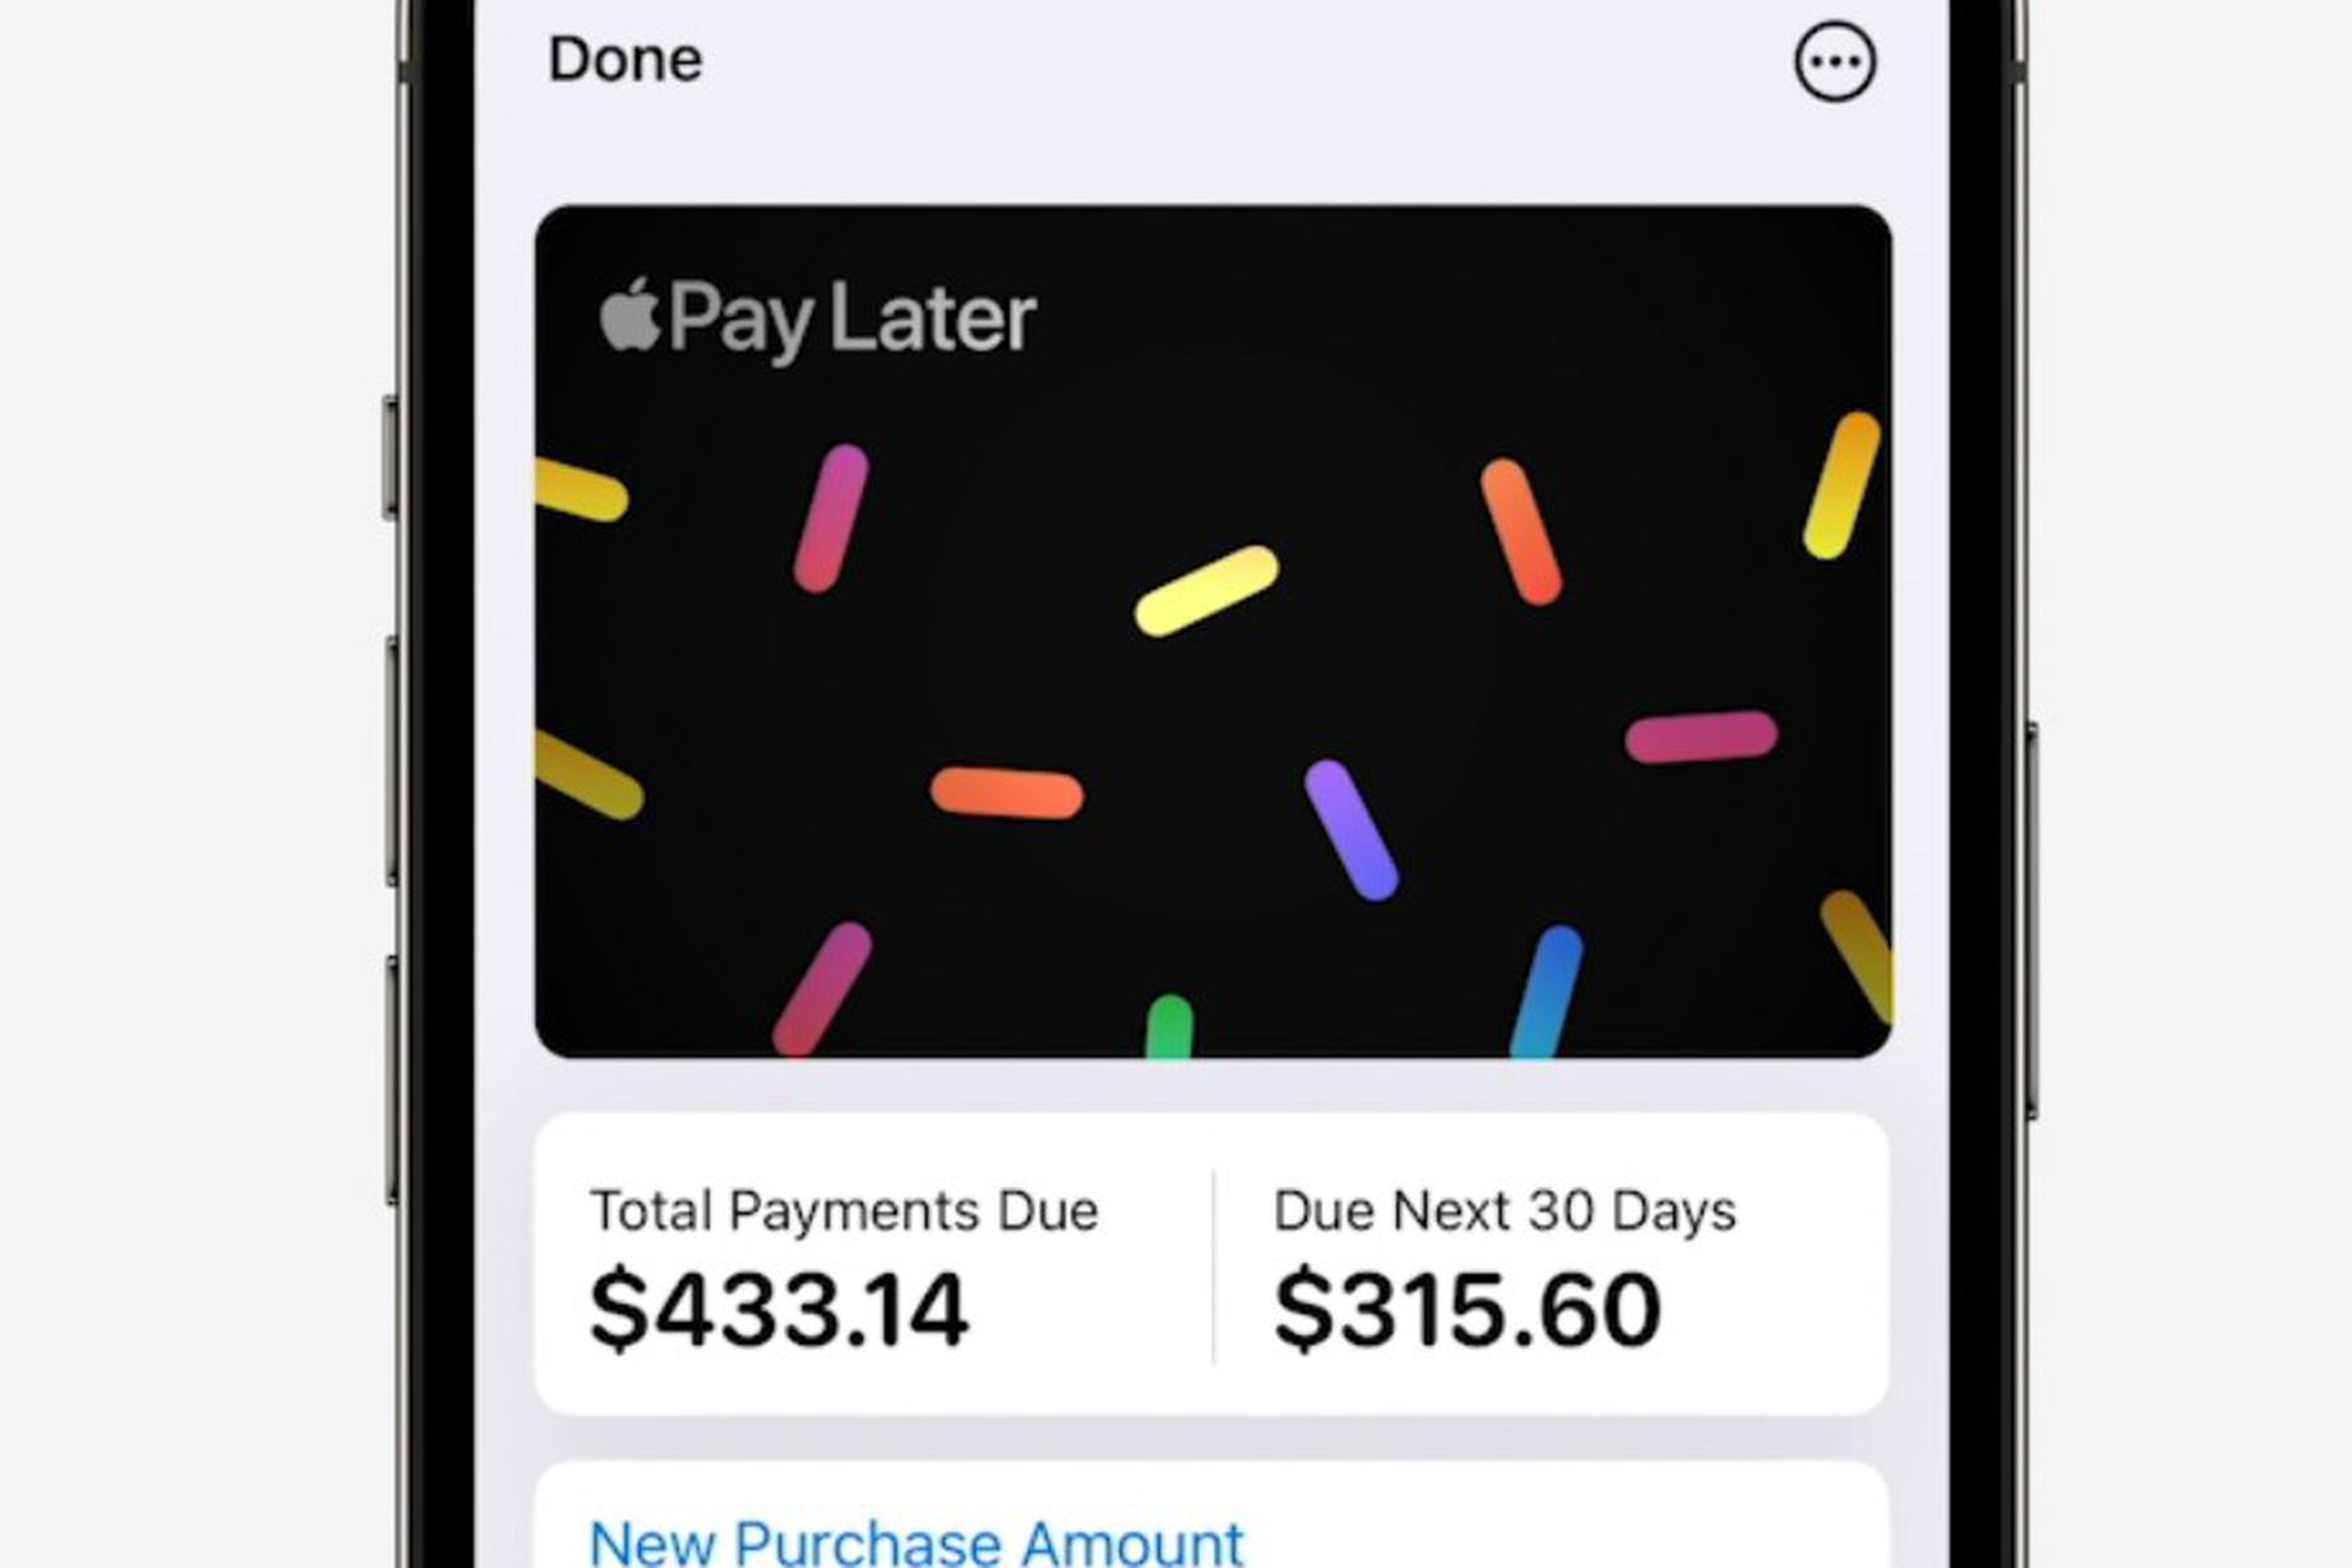 Apple Pay Later is a new feature in iOS 16.